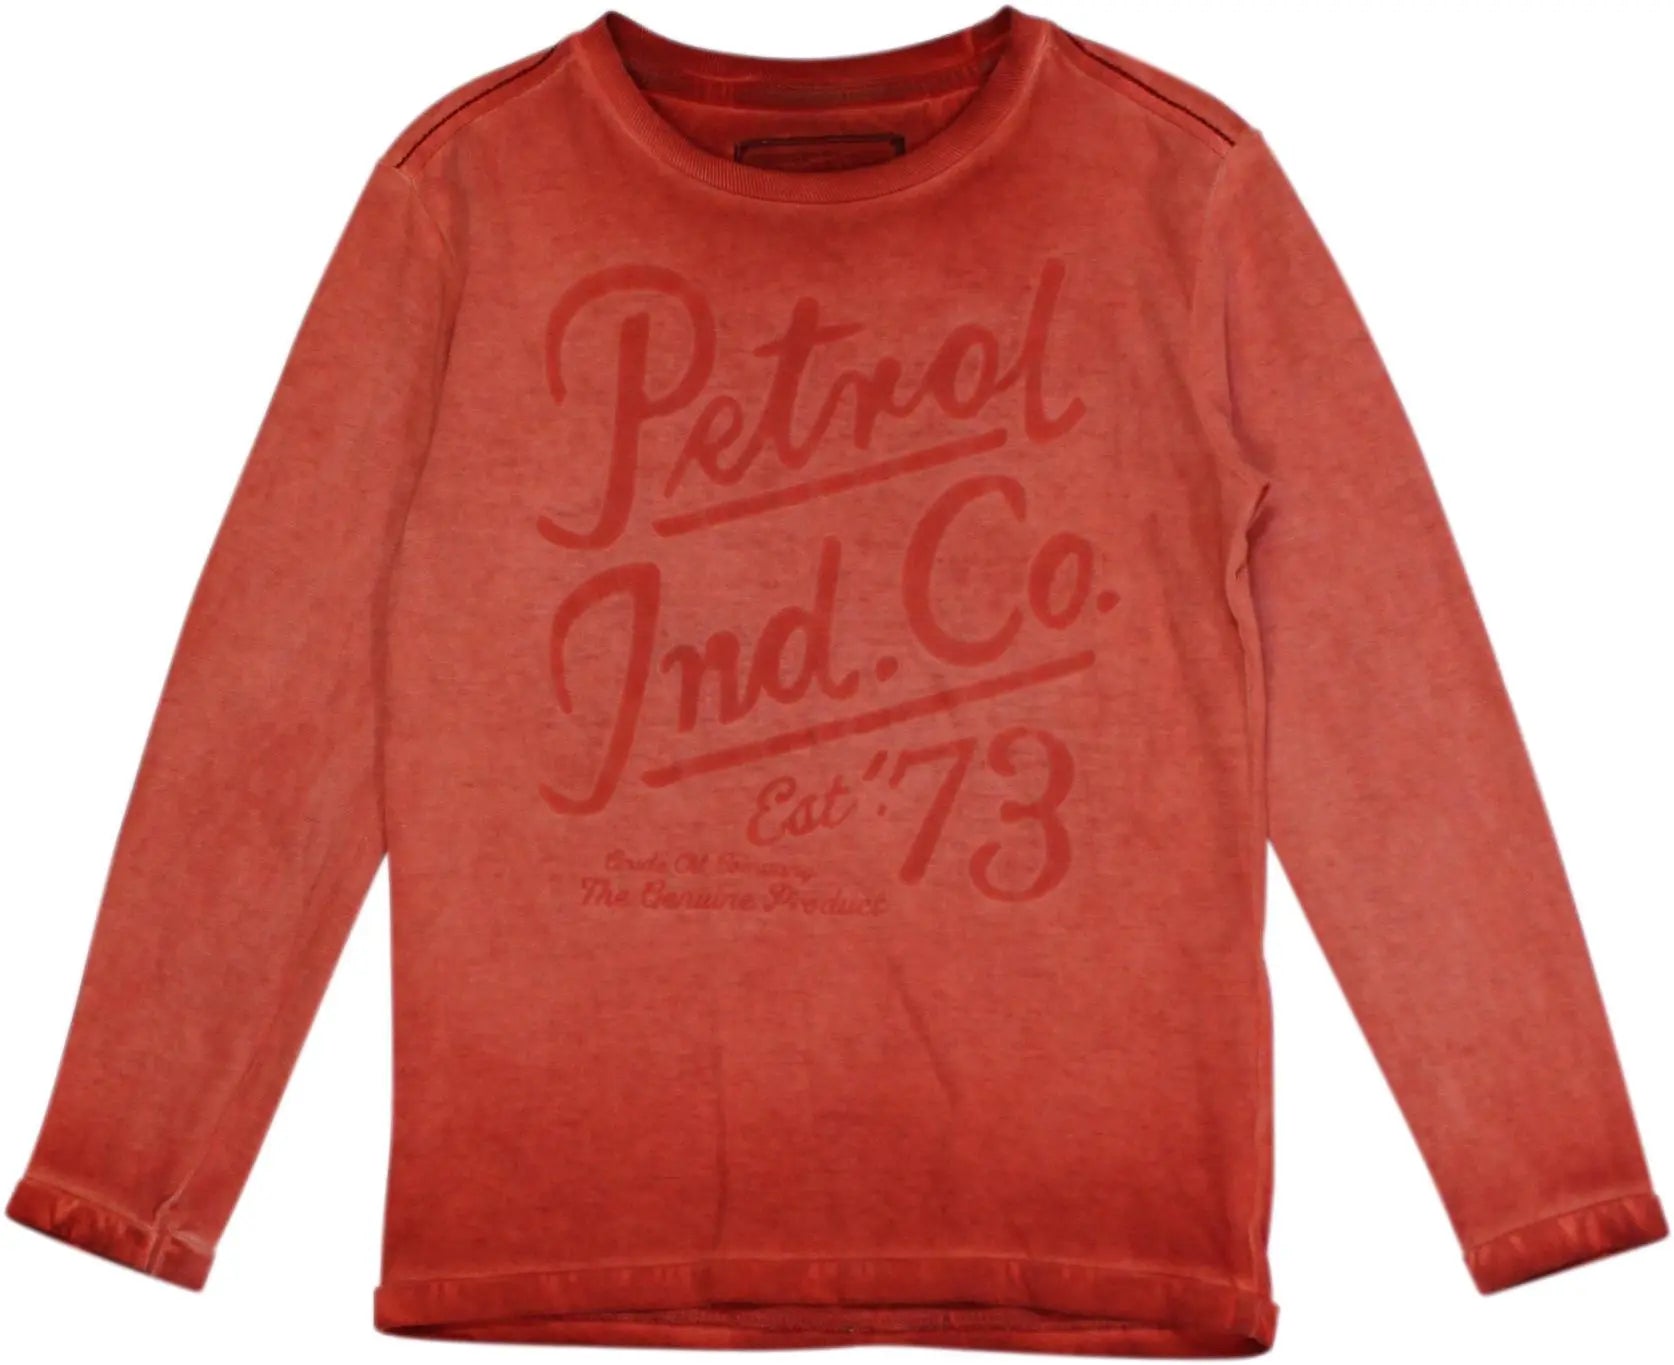 Petrol - BLUE10244- ThriftTale.com - Vintage and second handclothing